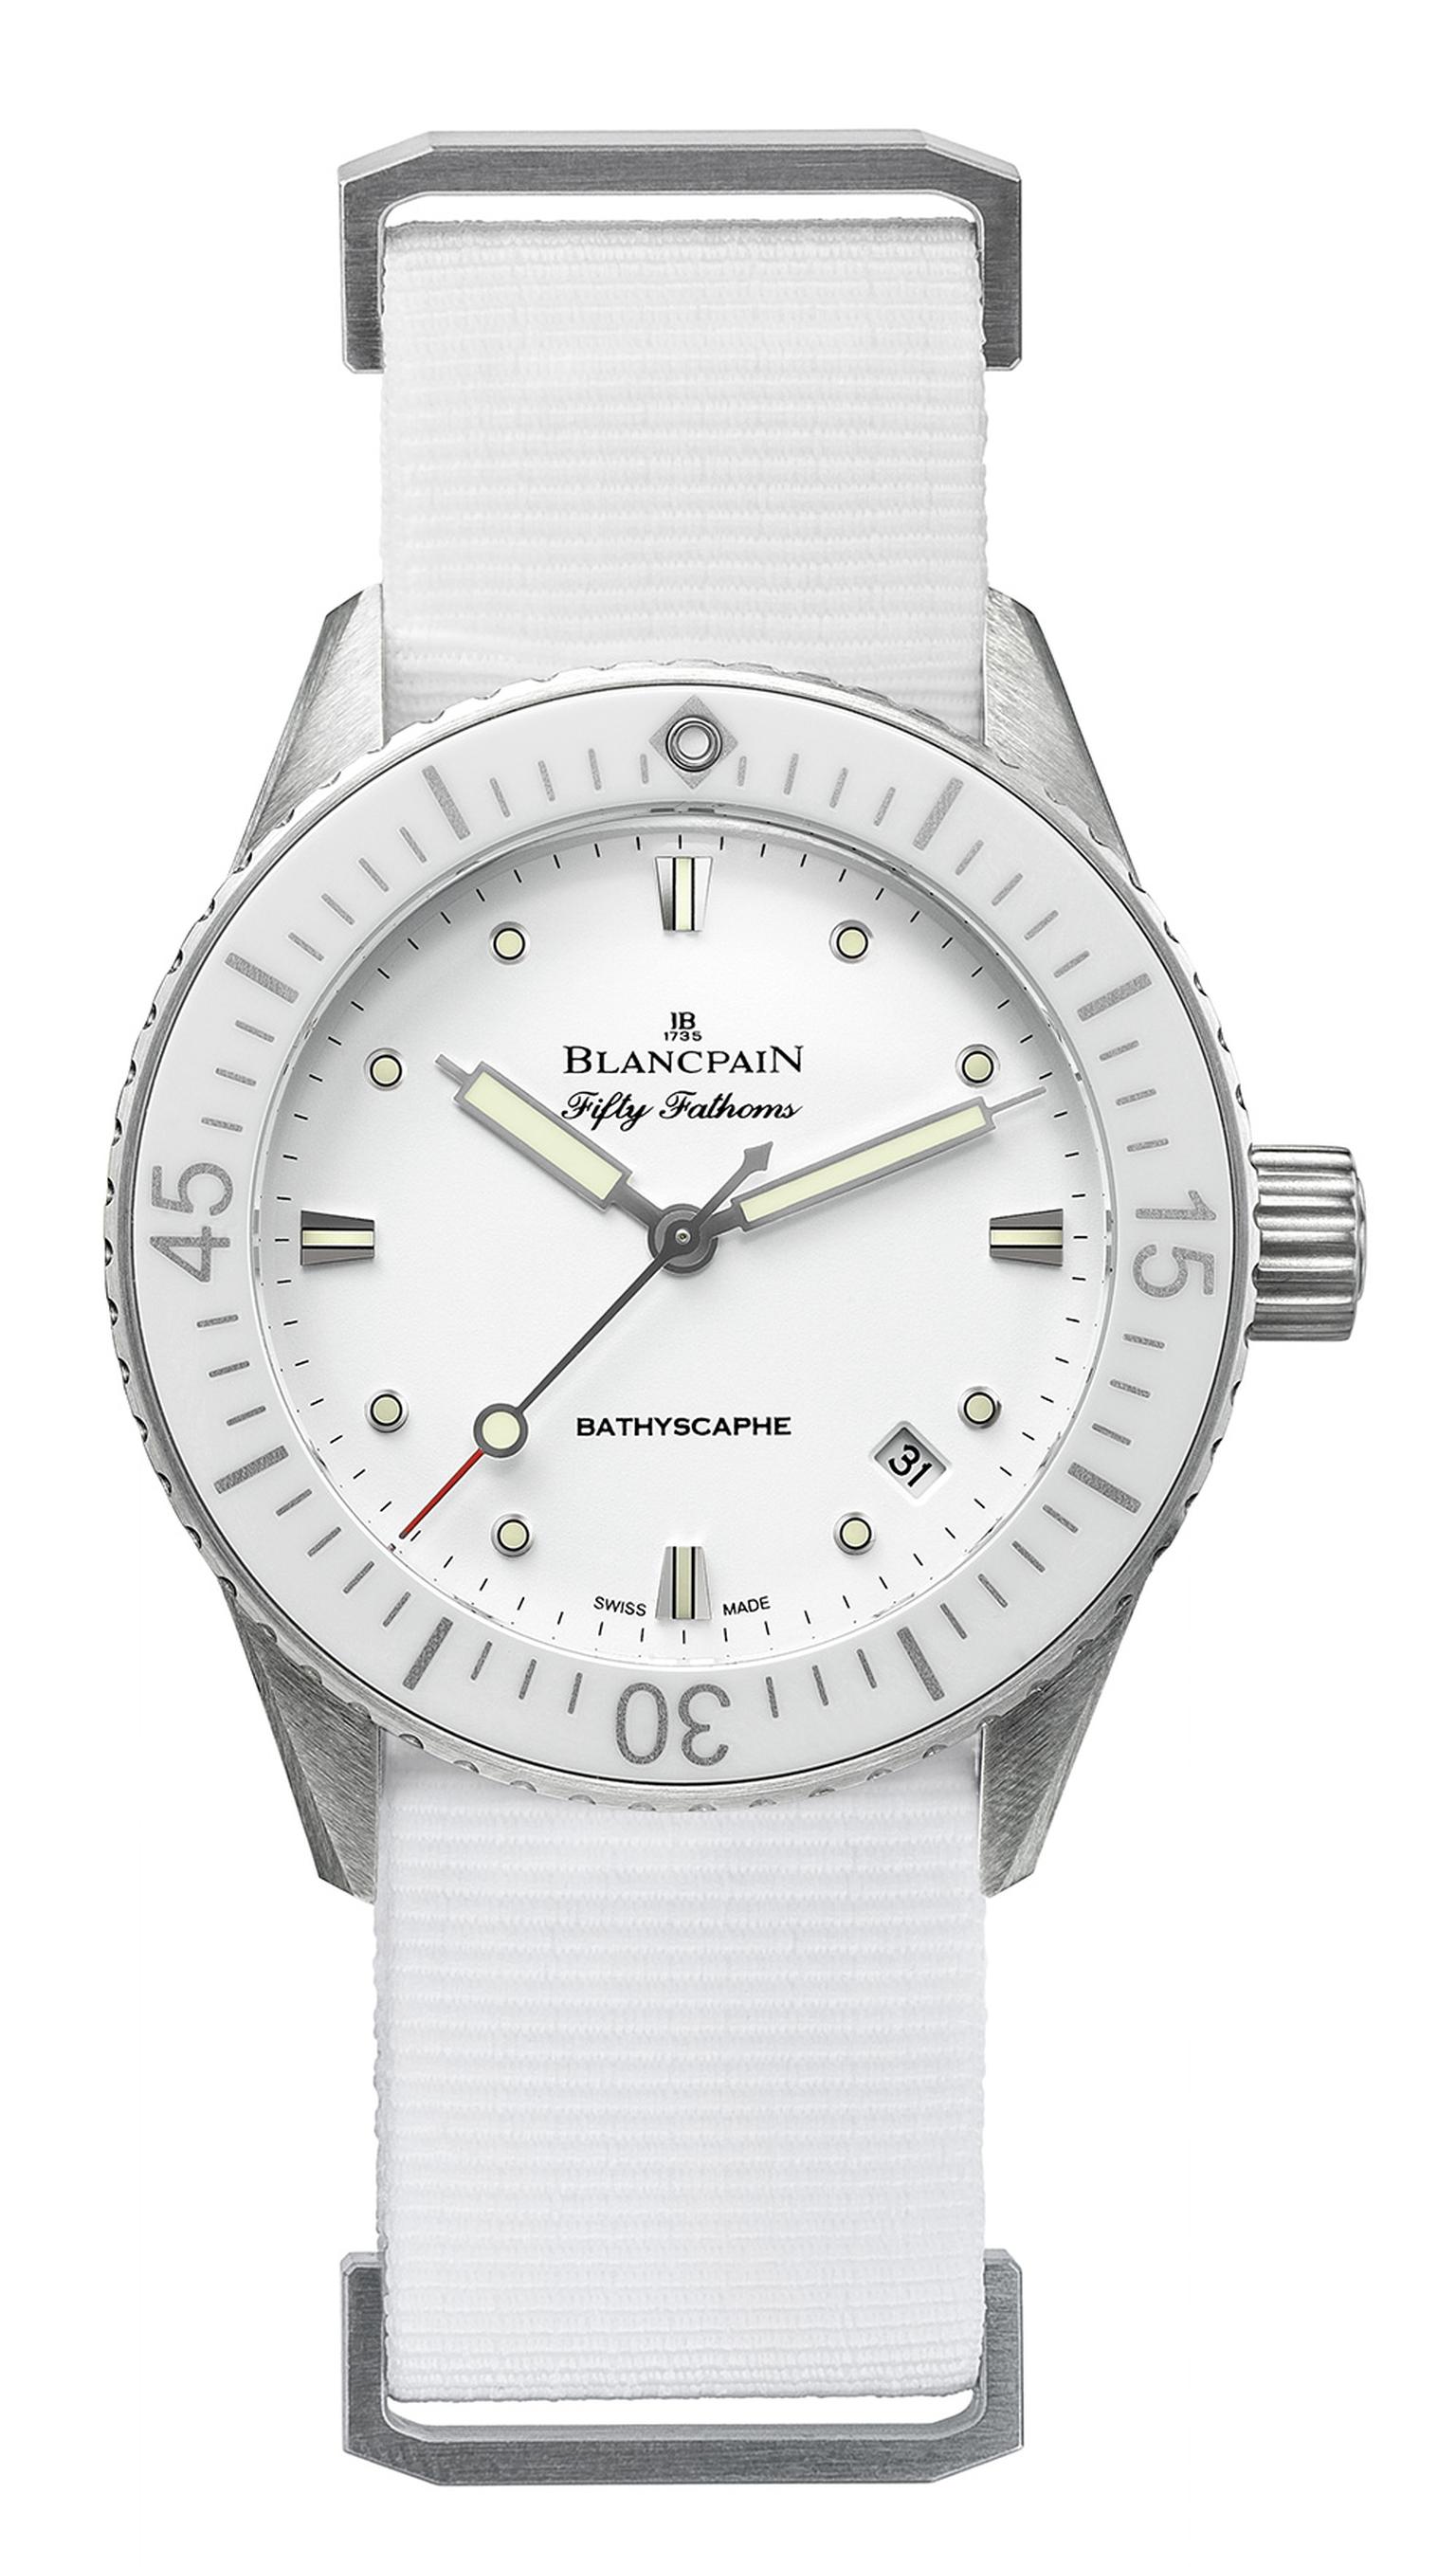 Blancpain's all-white Fifty Fathoms Bathyscaphe dive watch.